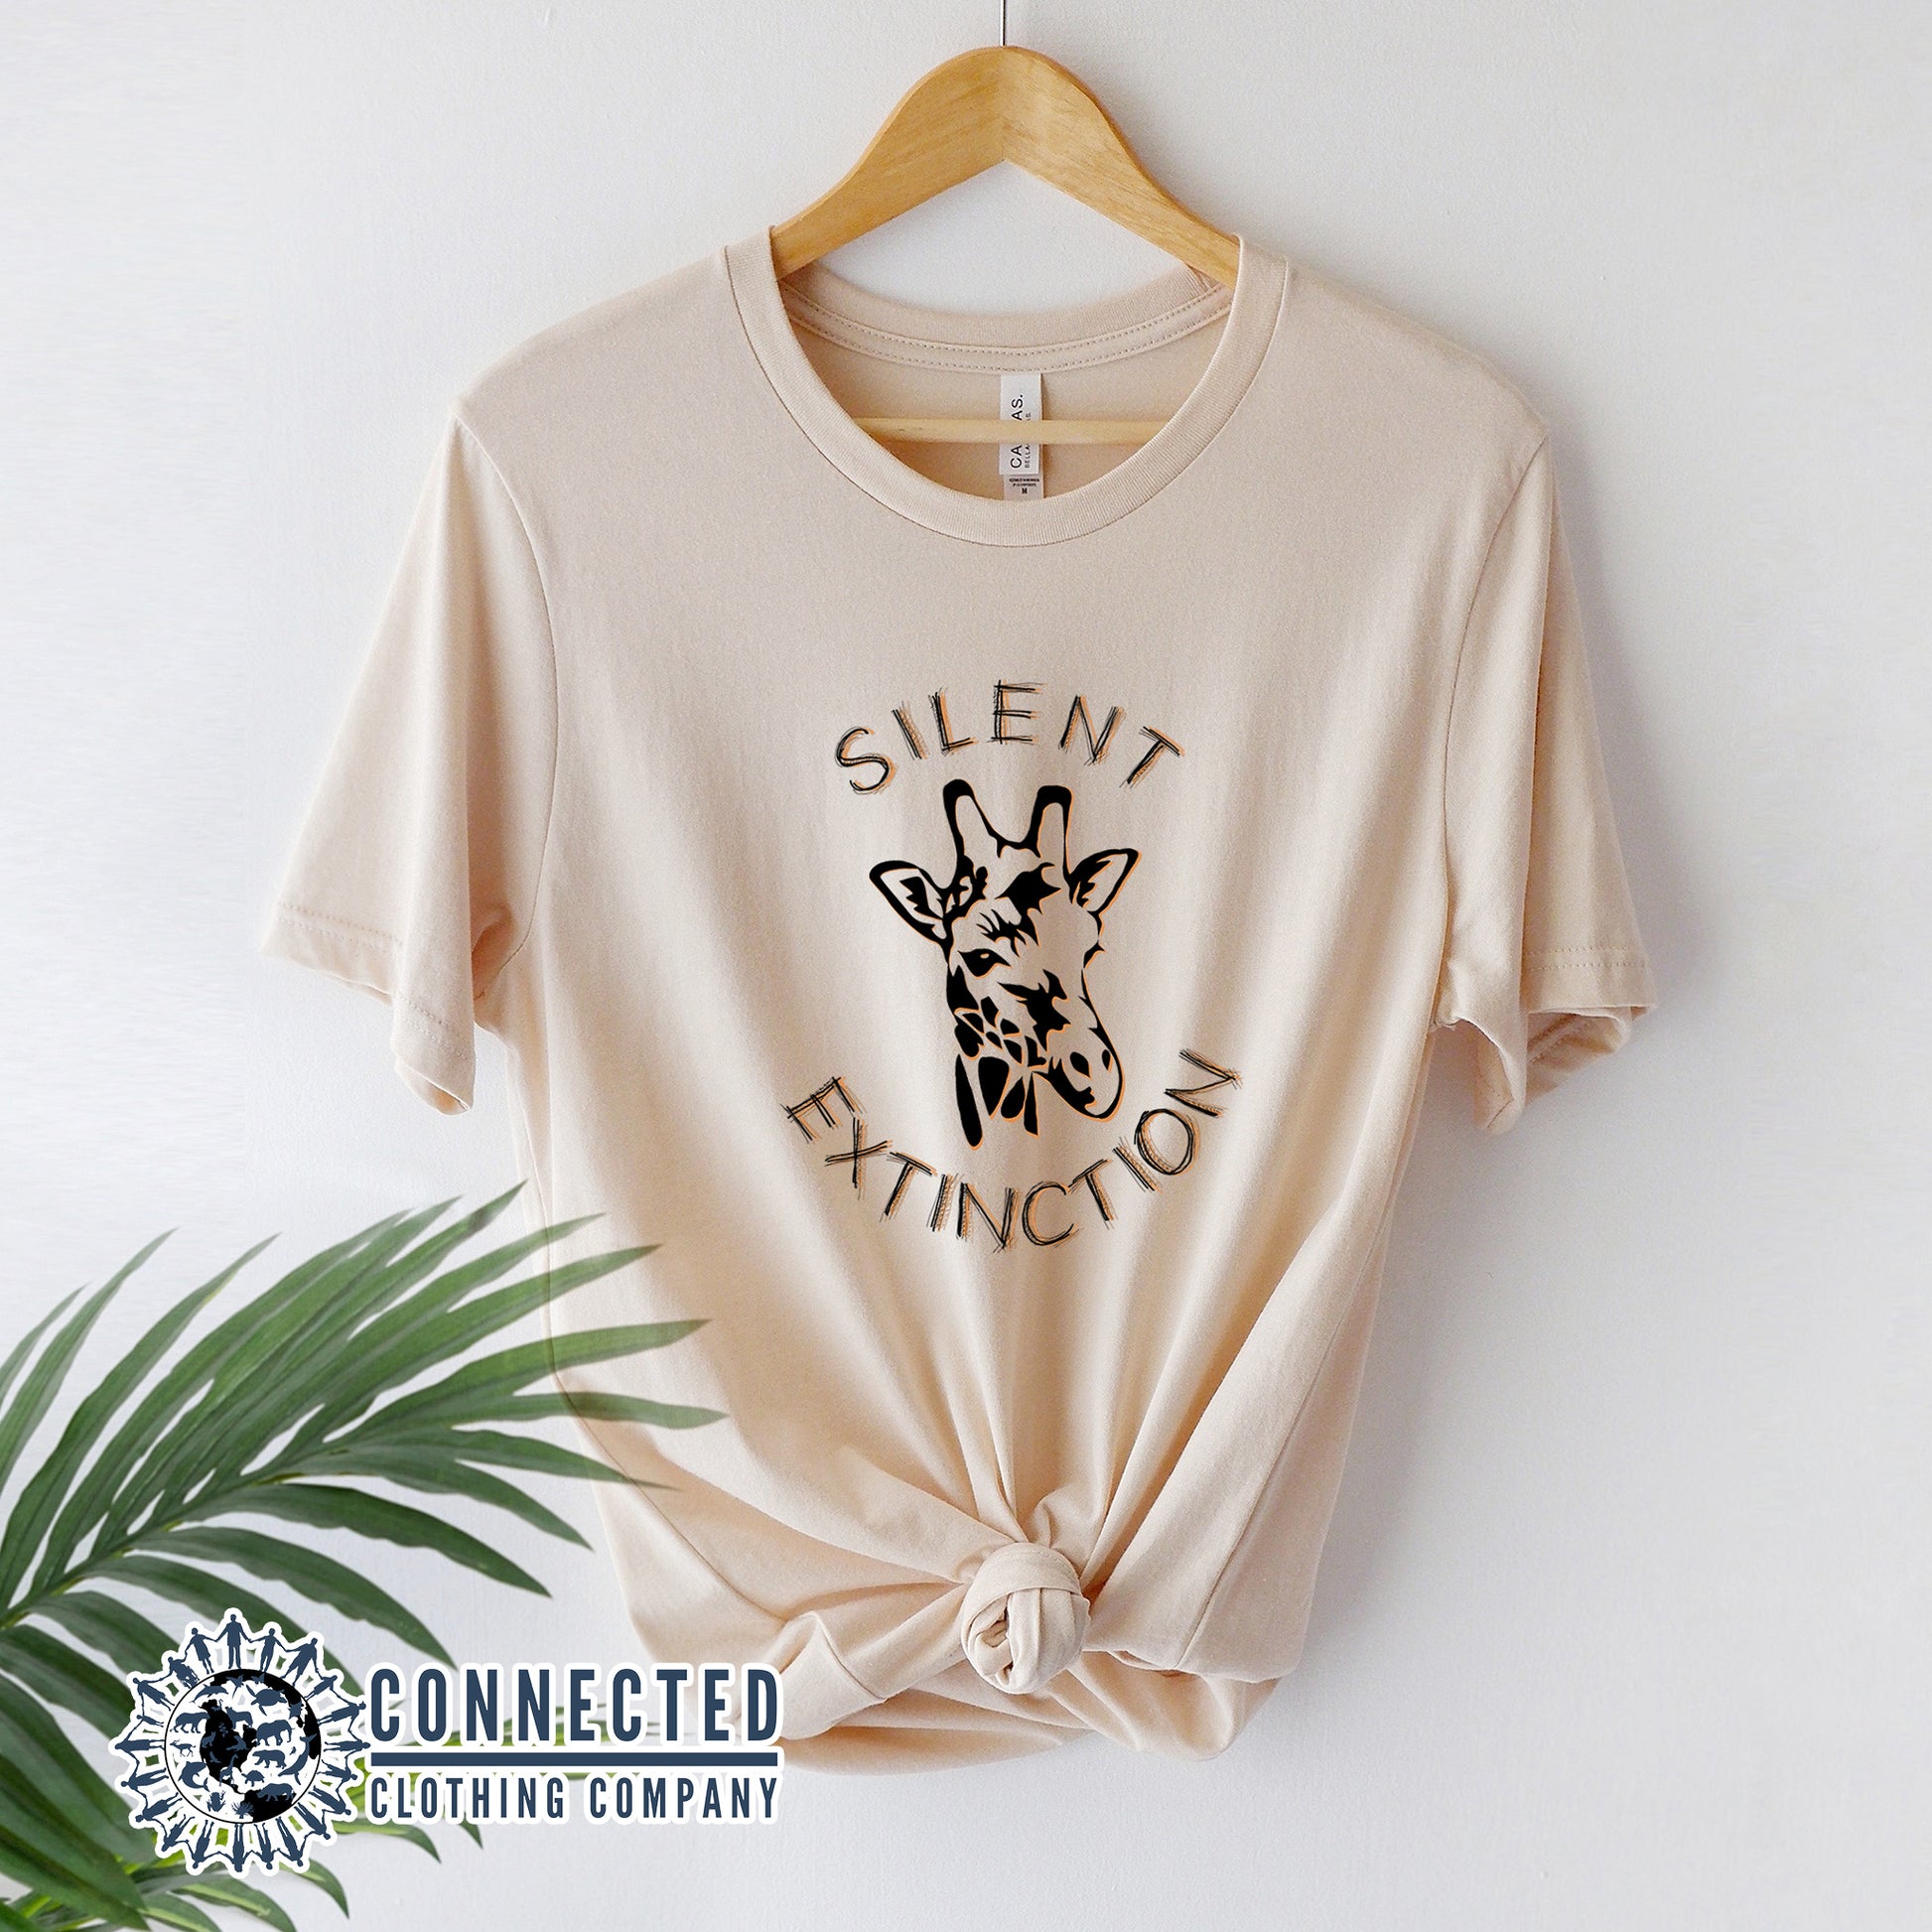 Soft Cream Giraffe Silent Extinction Short-Sleeve T-Shirt - Connected Clothing Company - 10% of profits donated to the Giraffe Conservation Foundation